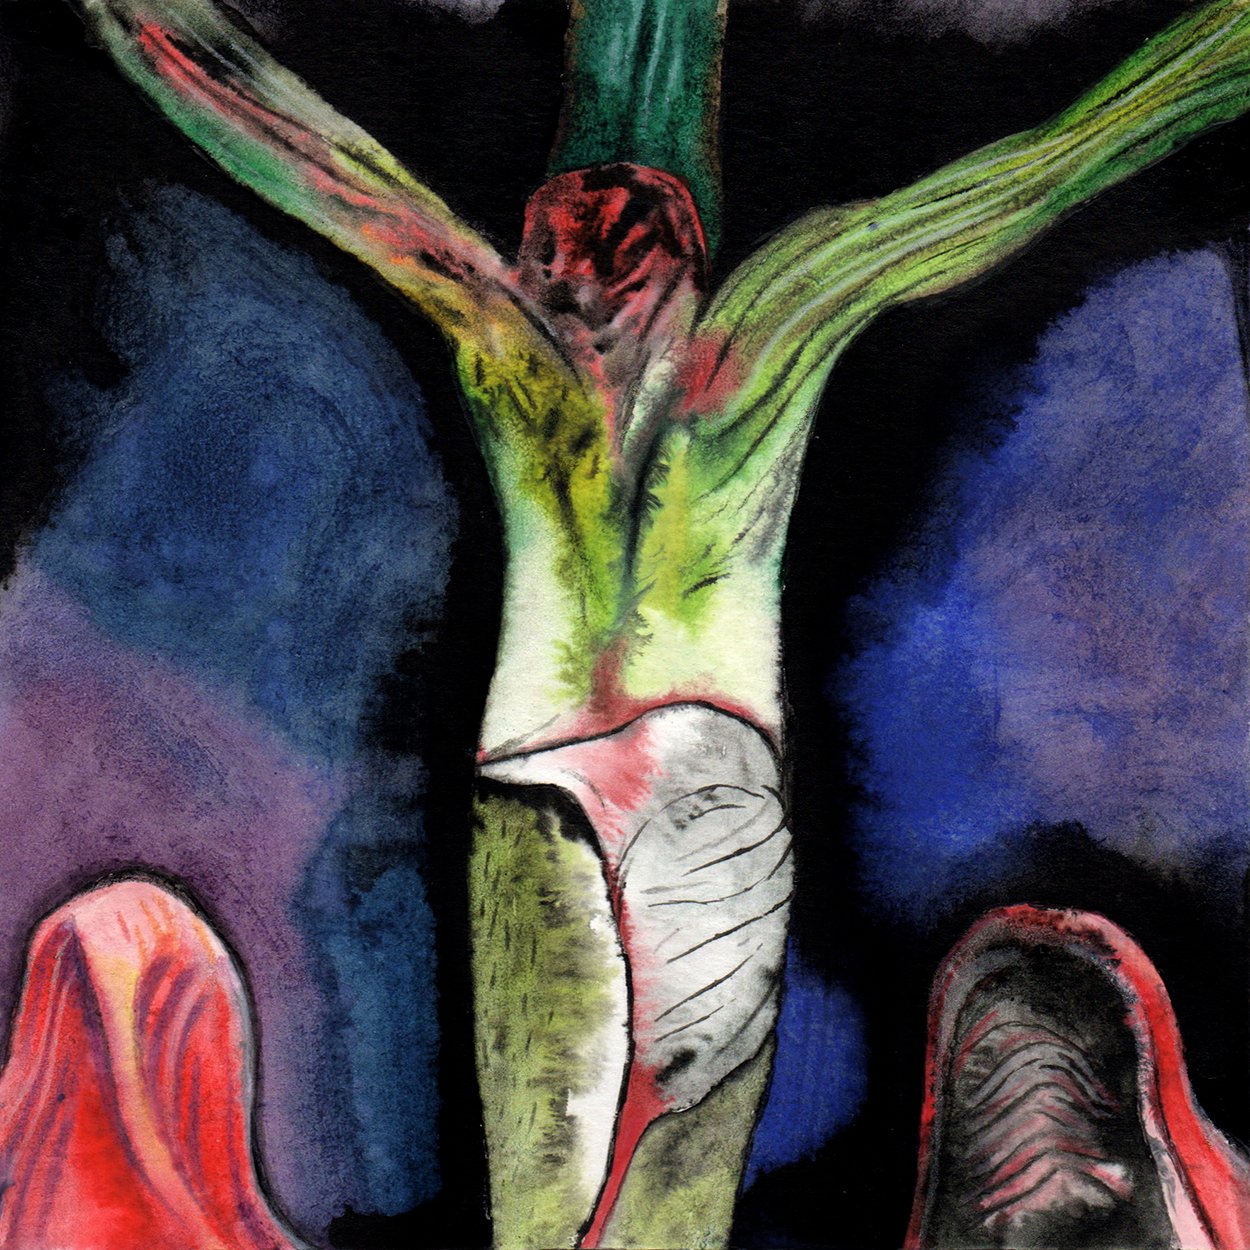 Crucifixion 2 (2nd series).